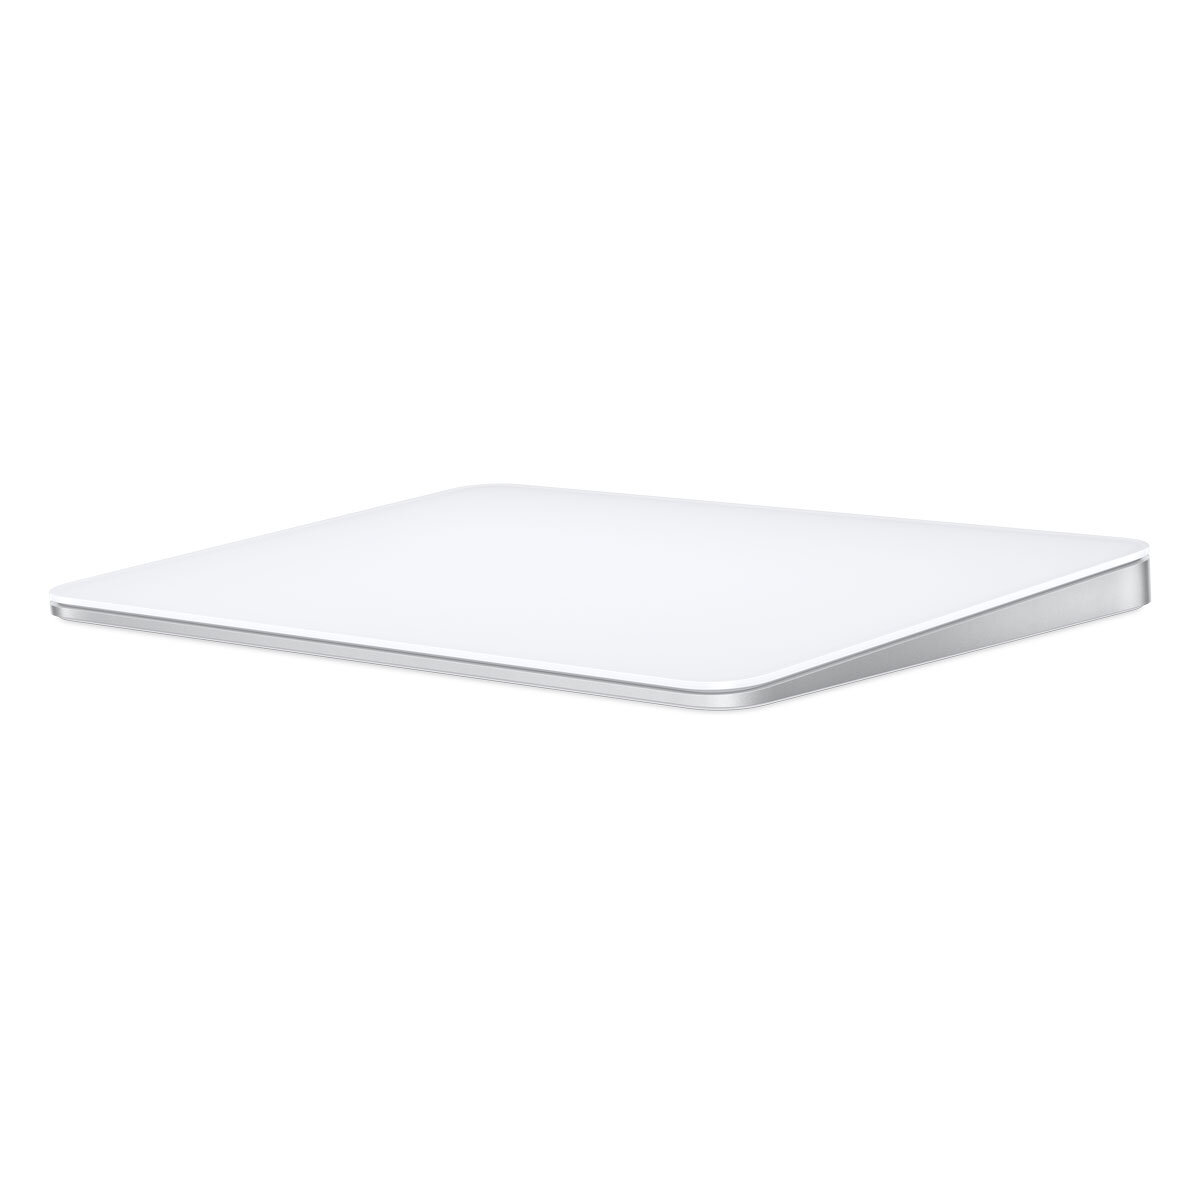 Buy Apple Magic Trackpad - White Multi-Touch Surface, MK2D3Z/A at costco.co.uk